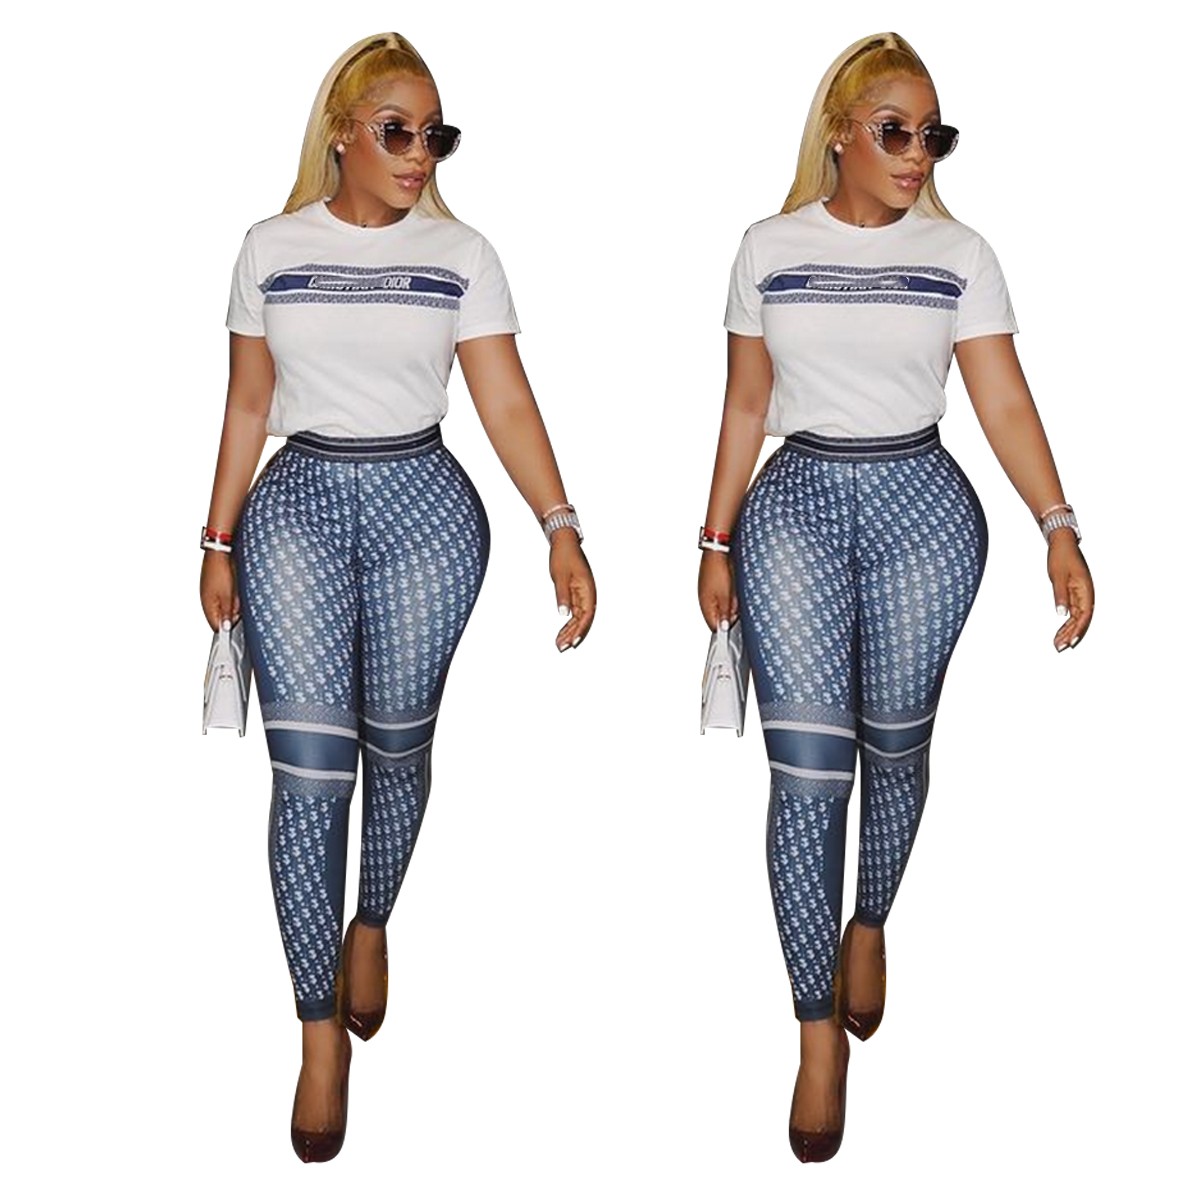 

Womens Two Piece Pants Summer Outfits Casual Crew Neck T-shirt and Trousers Set Free Ship, Dd